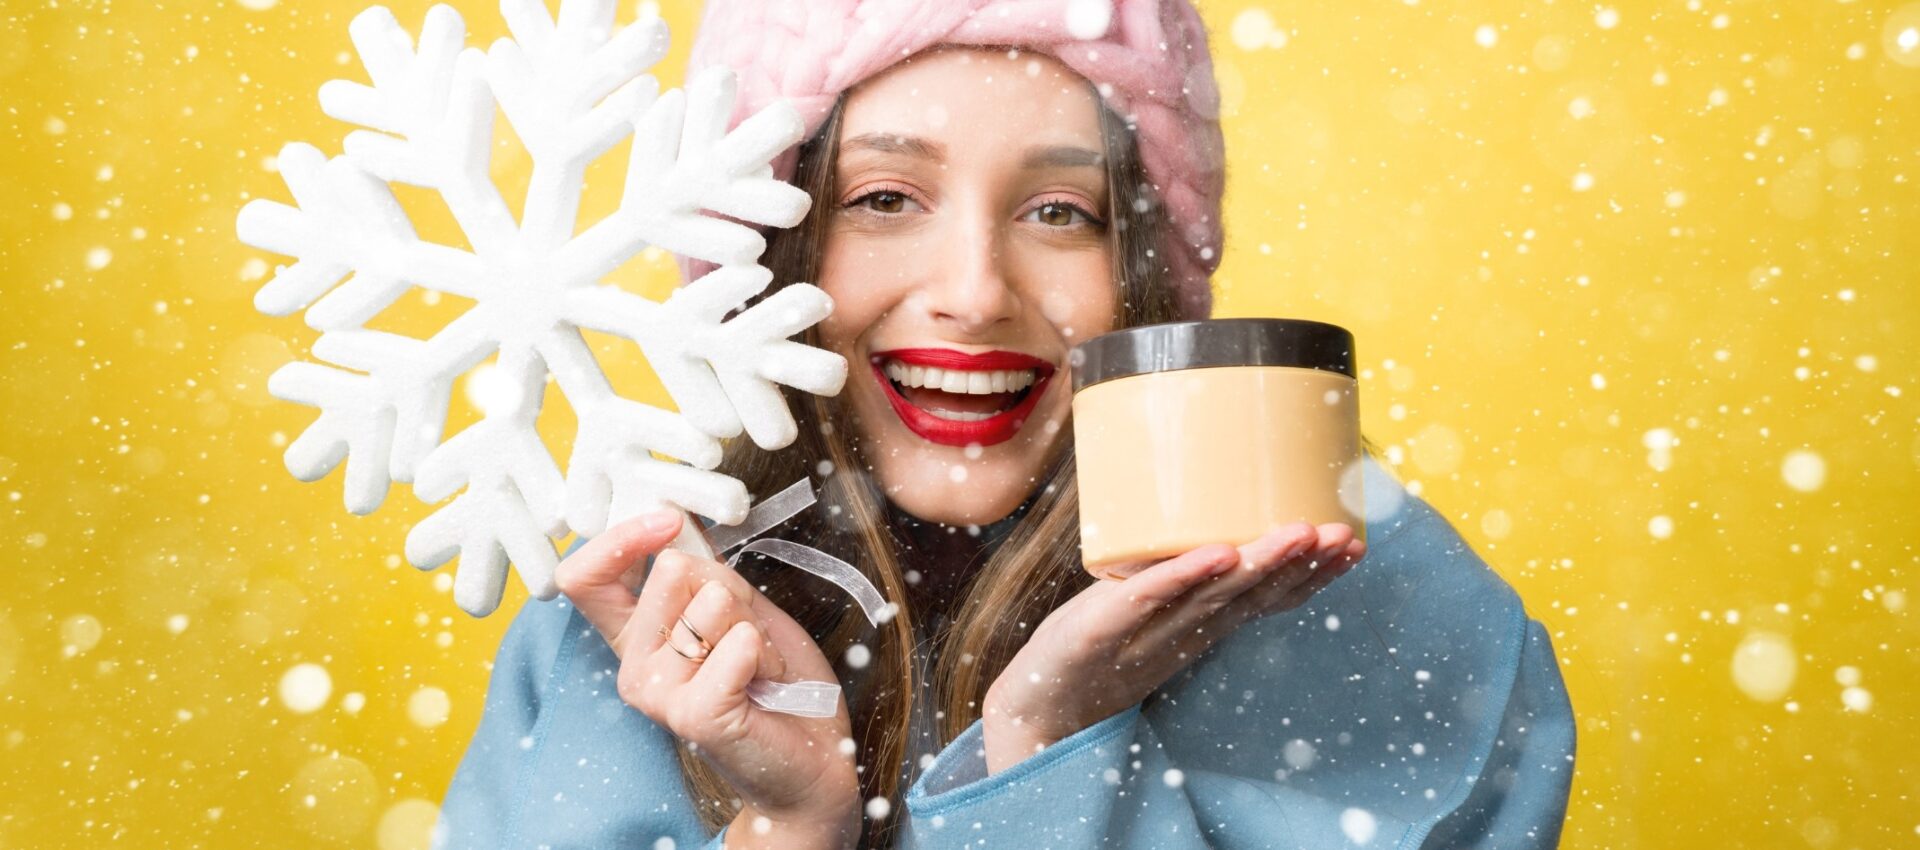 Best Skincare Products for fighting winter dryness, giving soft, supple skin